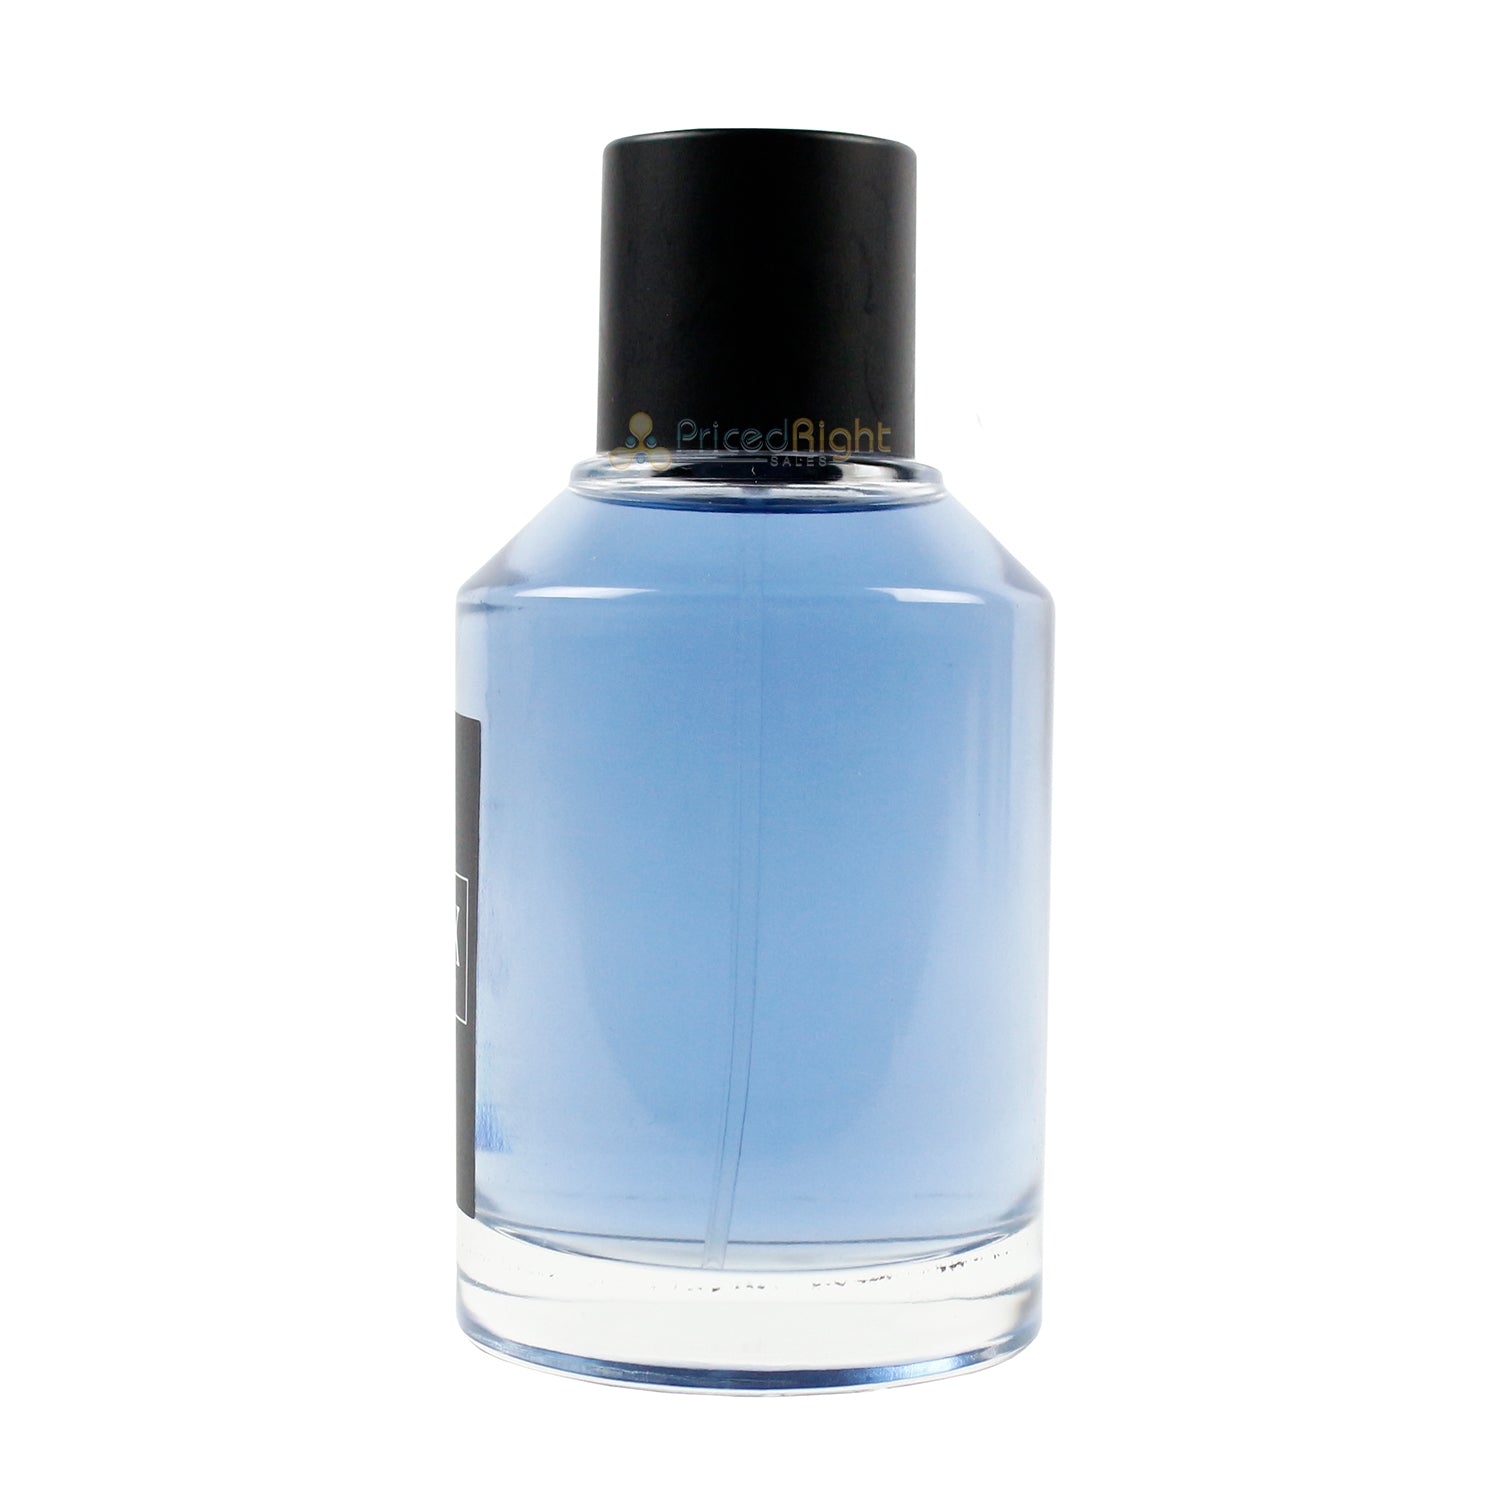 BroDux Ocean Royal Handcrafted High Quality Natural Cologne 3.4 oz Spray Bottle